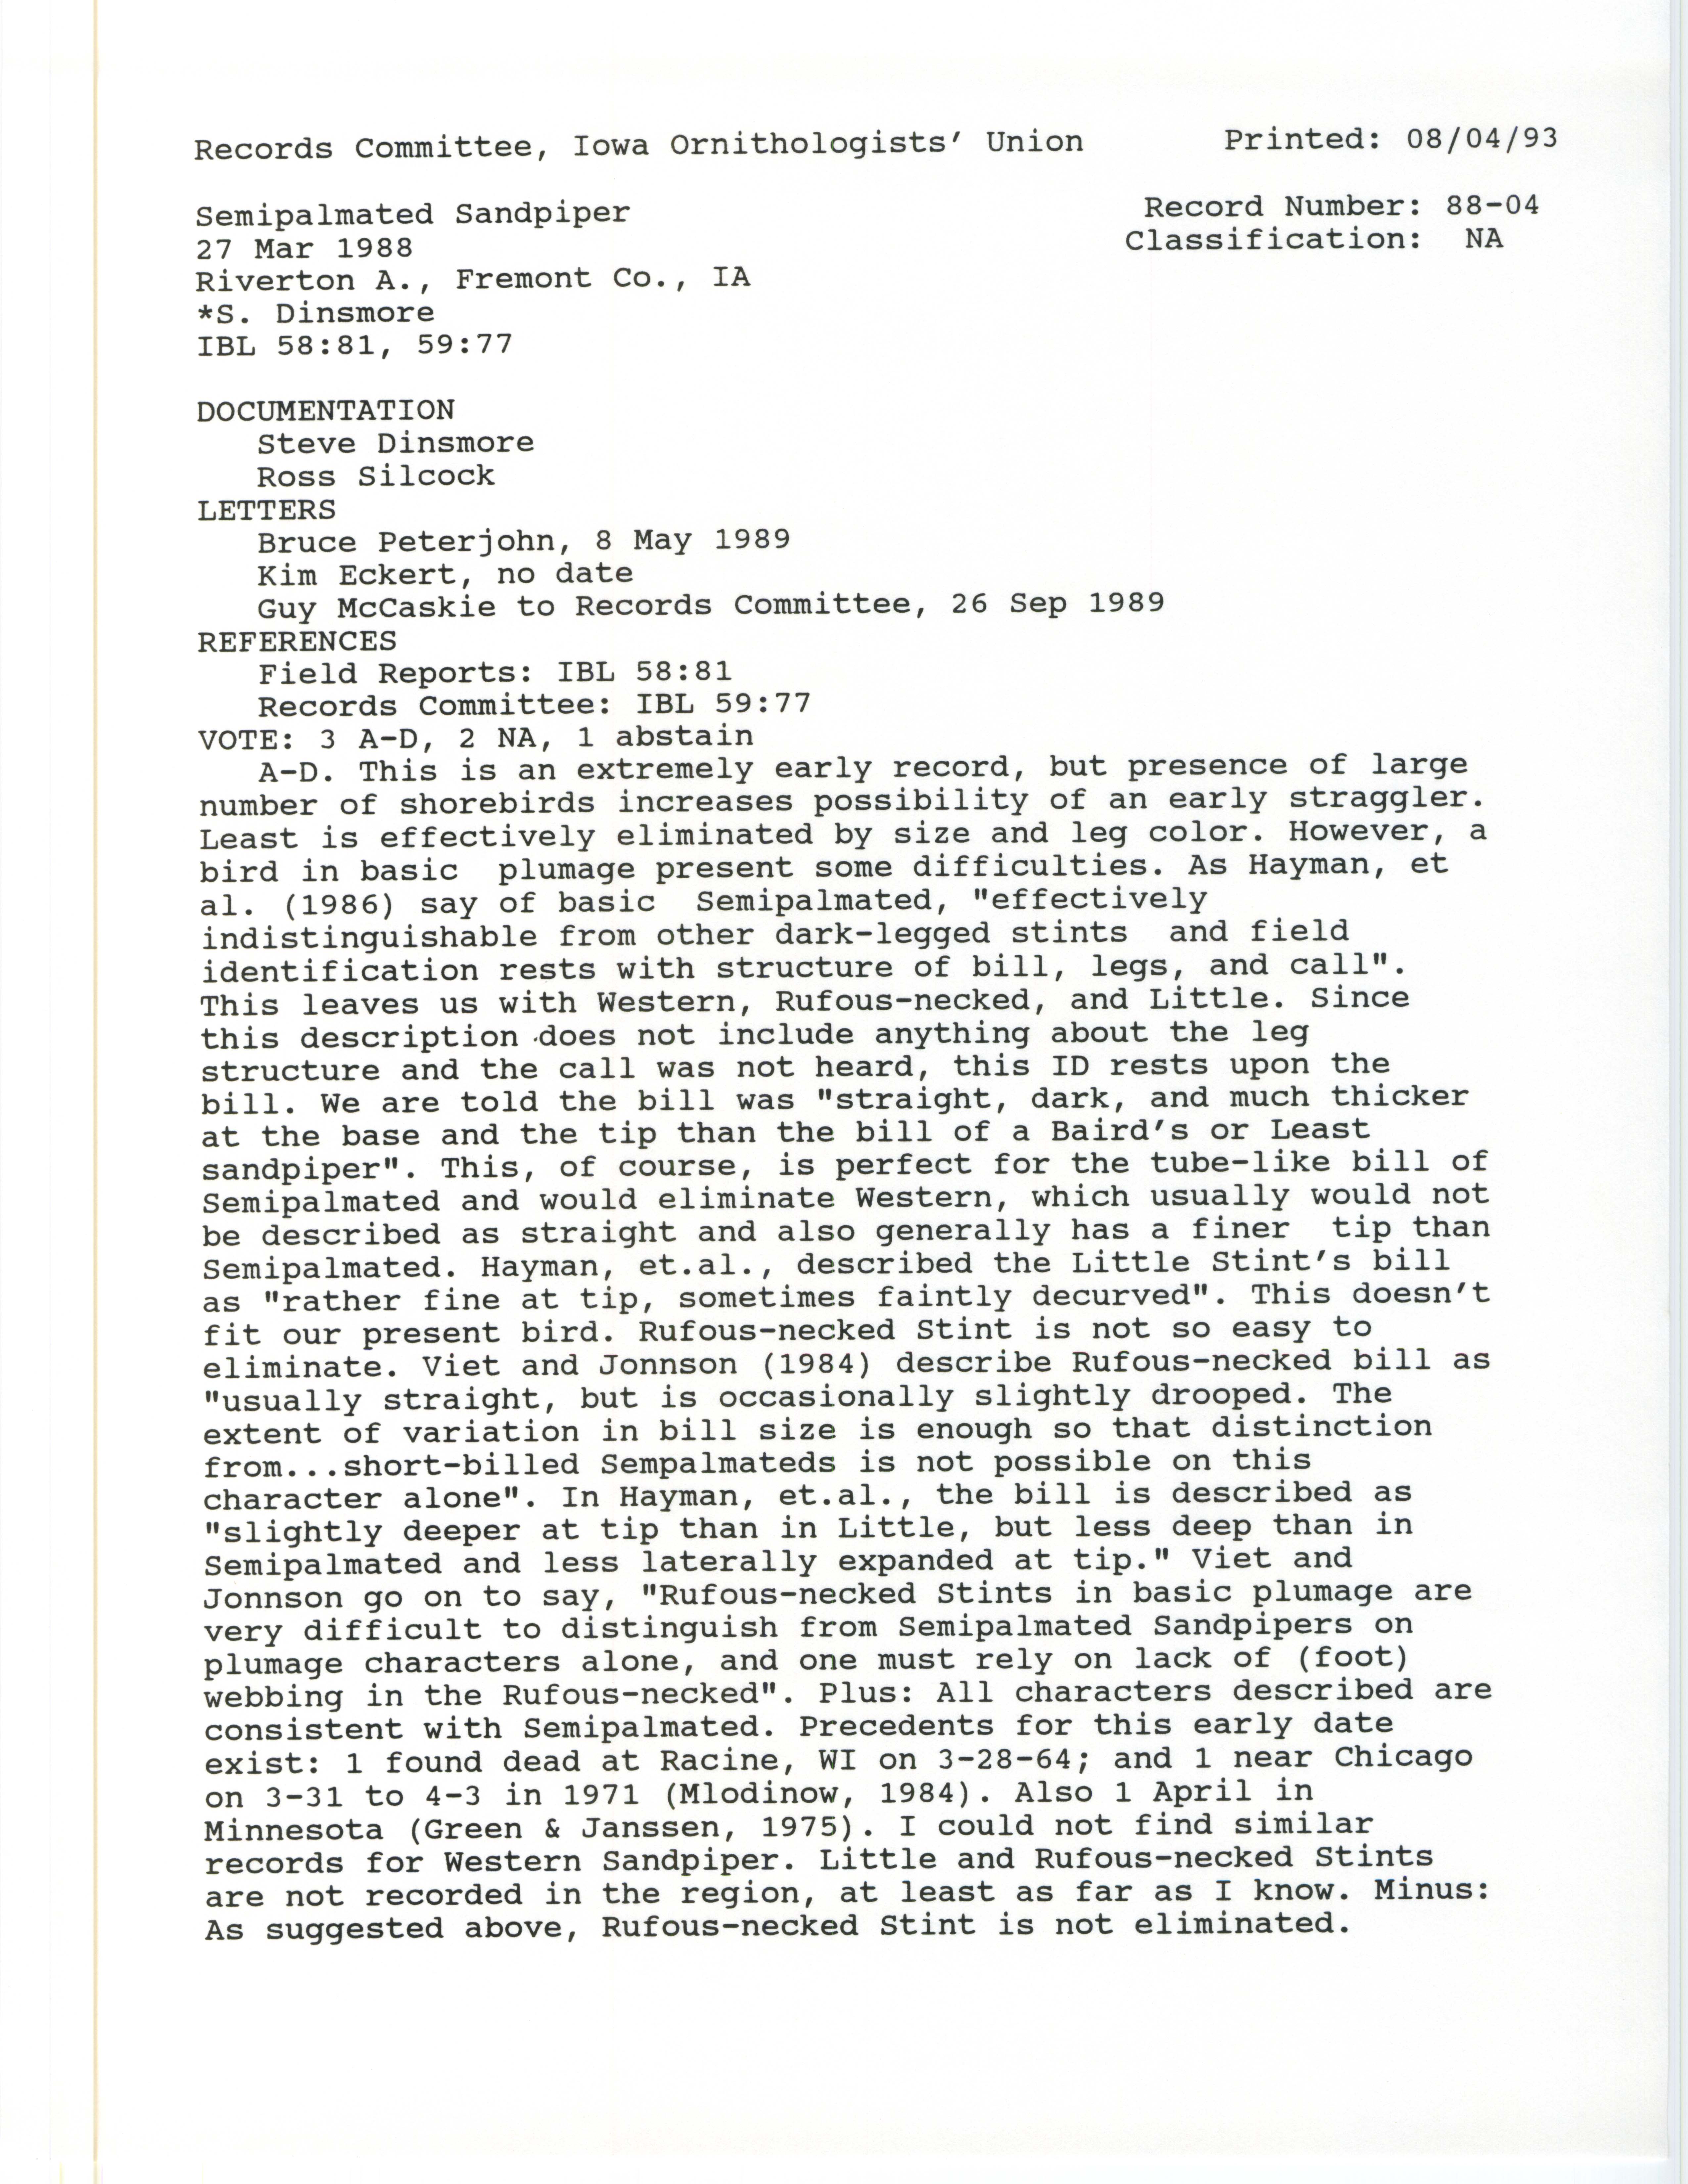 Records Committee review for rare bird sighting of Semipalmated Sandpiper at Riverton Wildlife Area, 1988